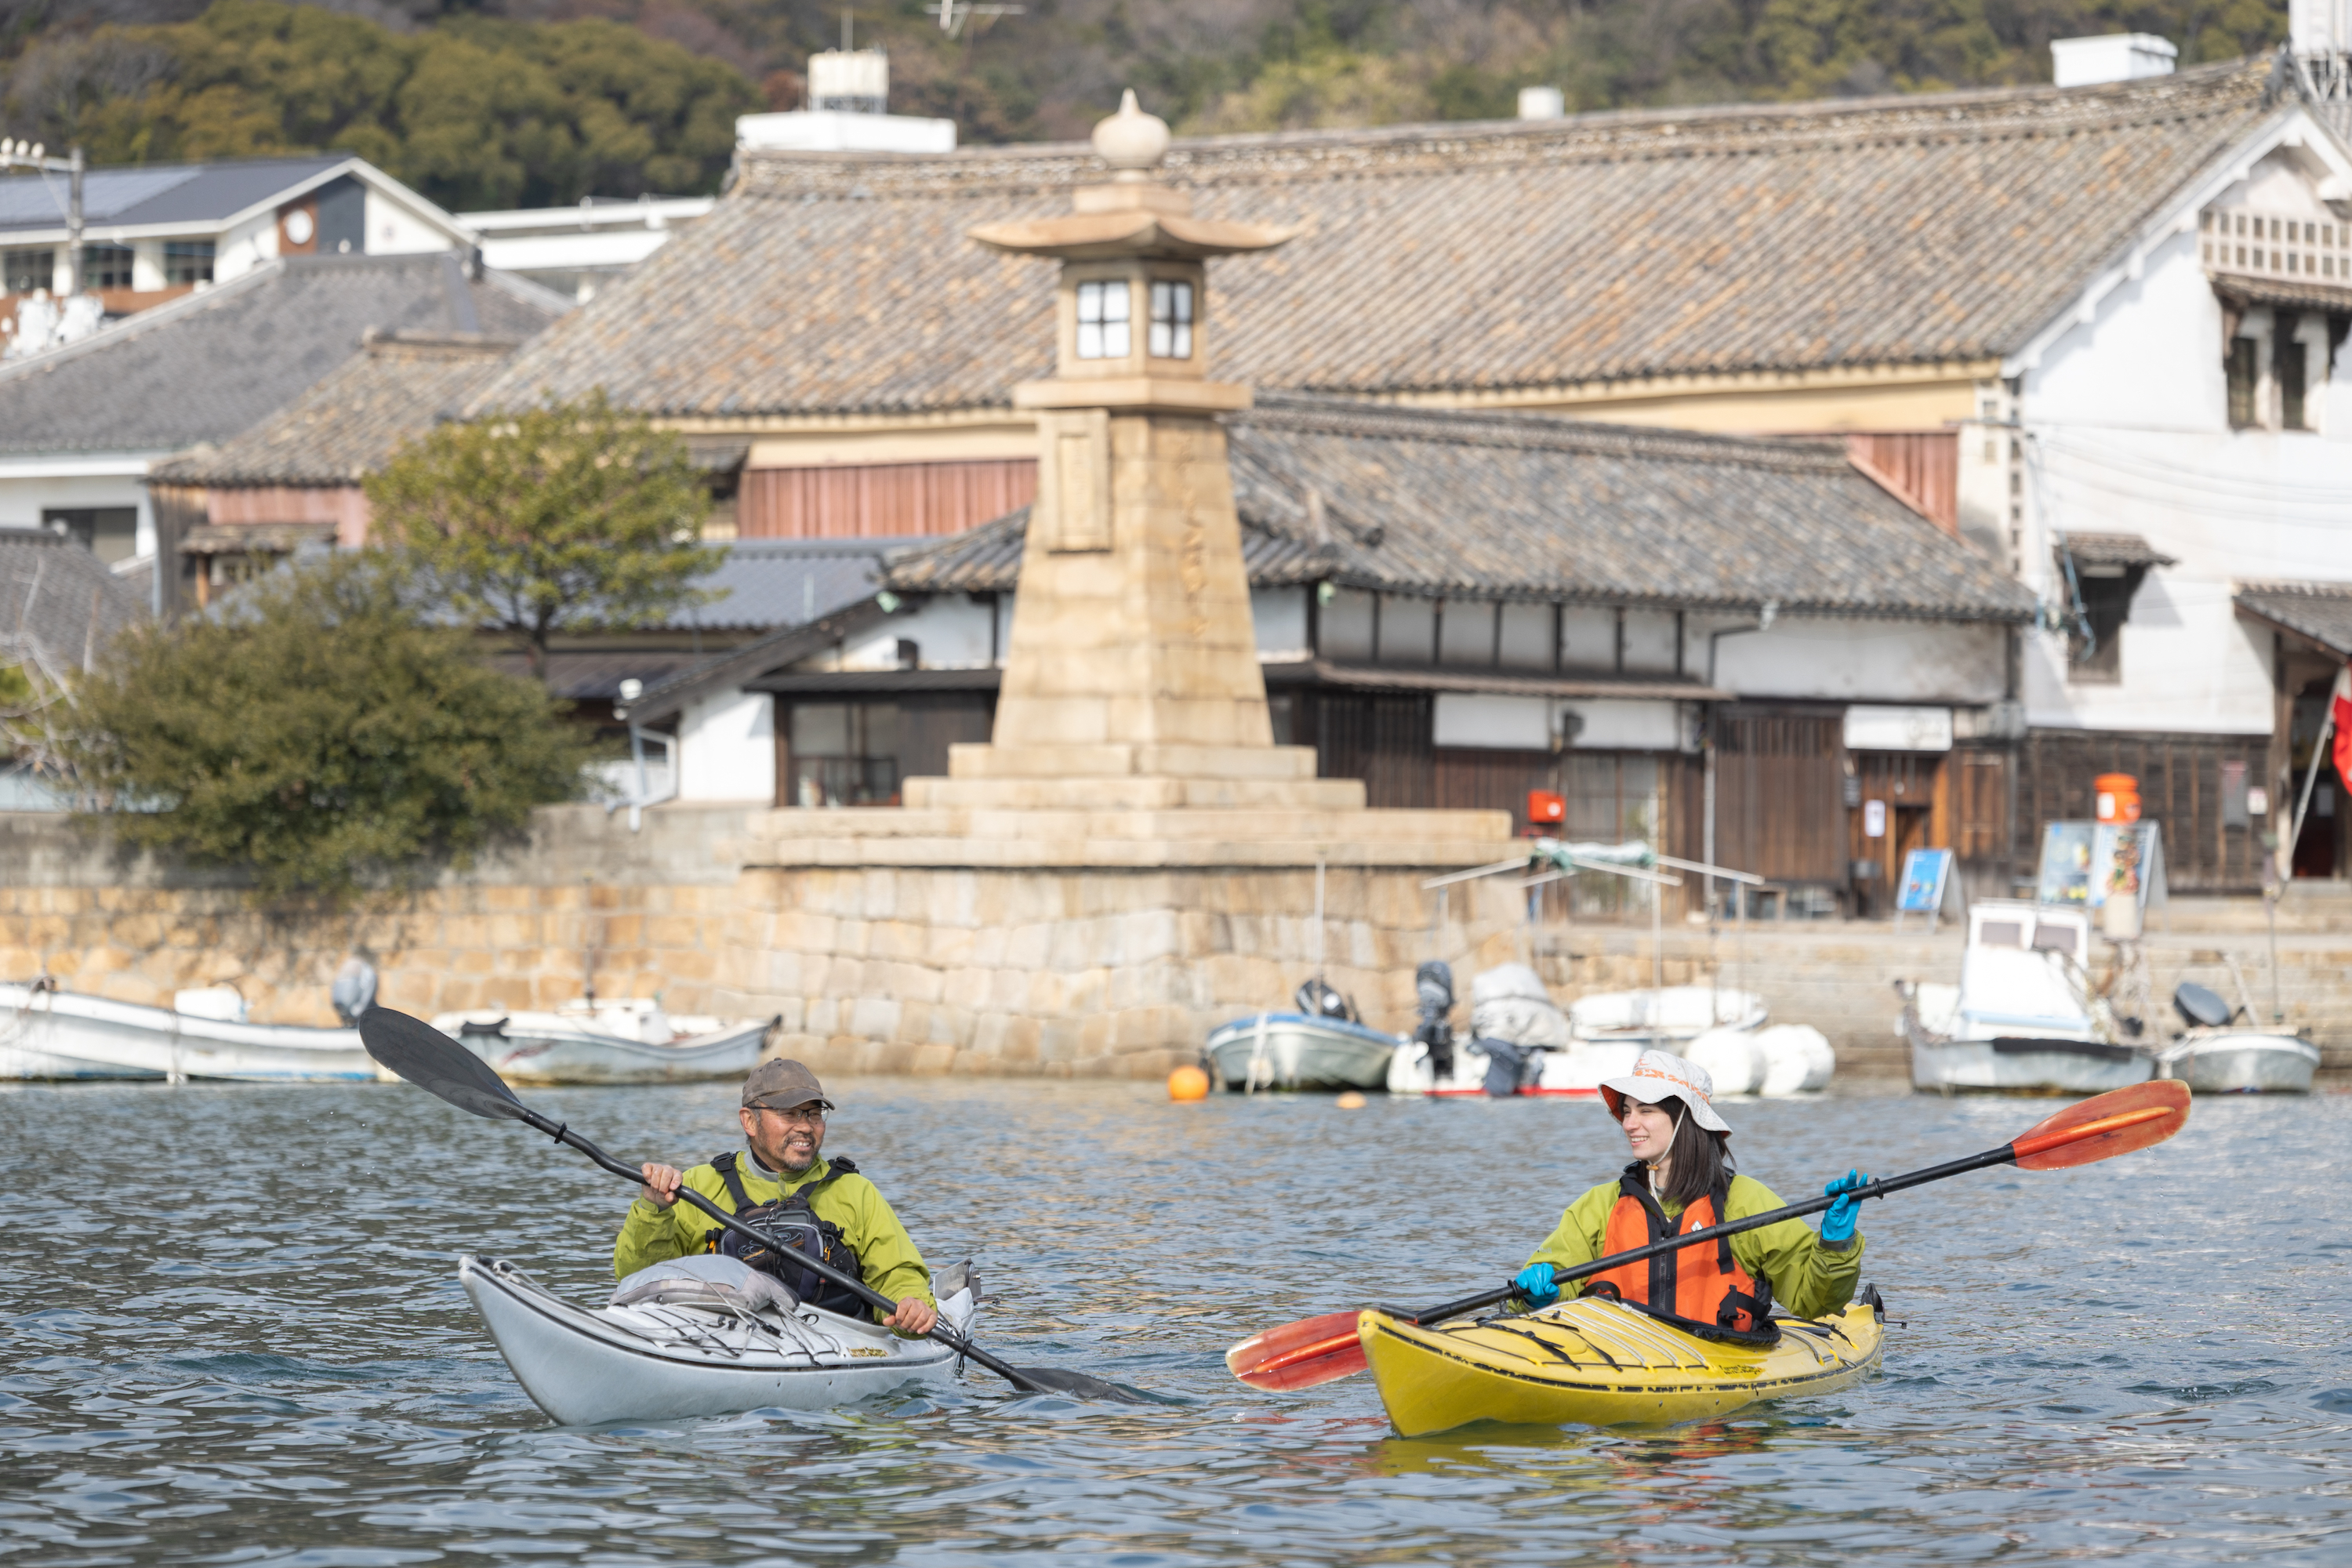 Explore the Nature that Inspired Ghibli Movies on an Exciting Kayak Tour (Half Day)